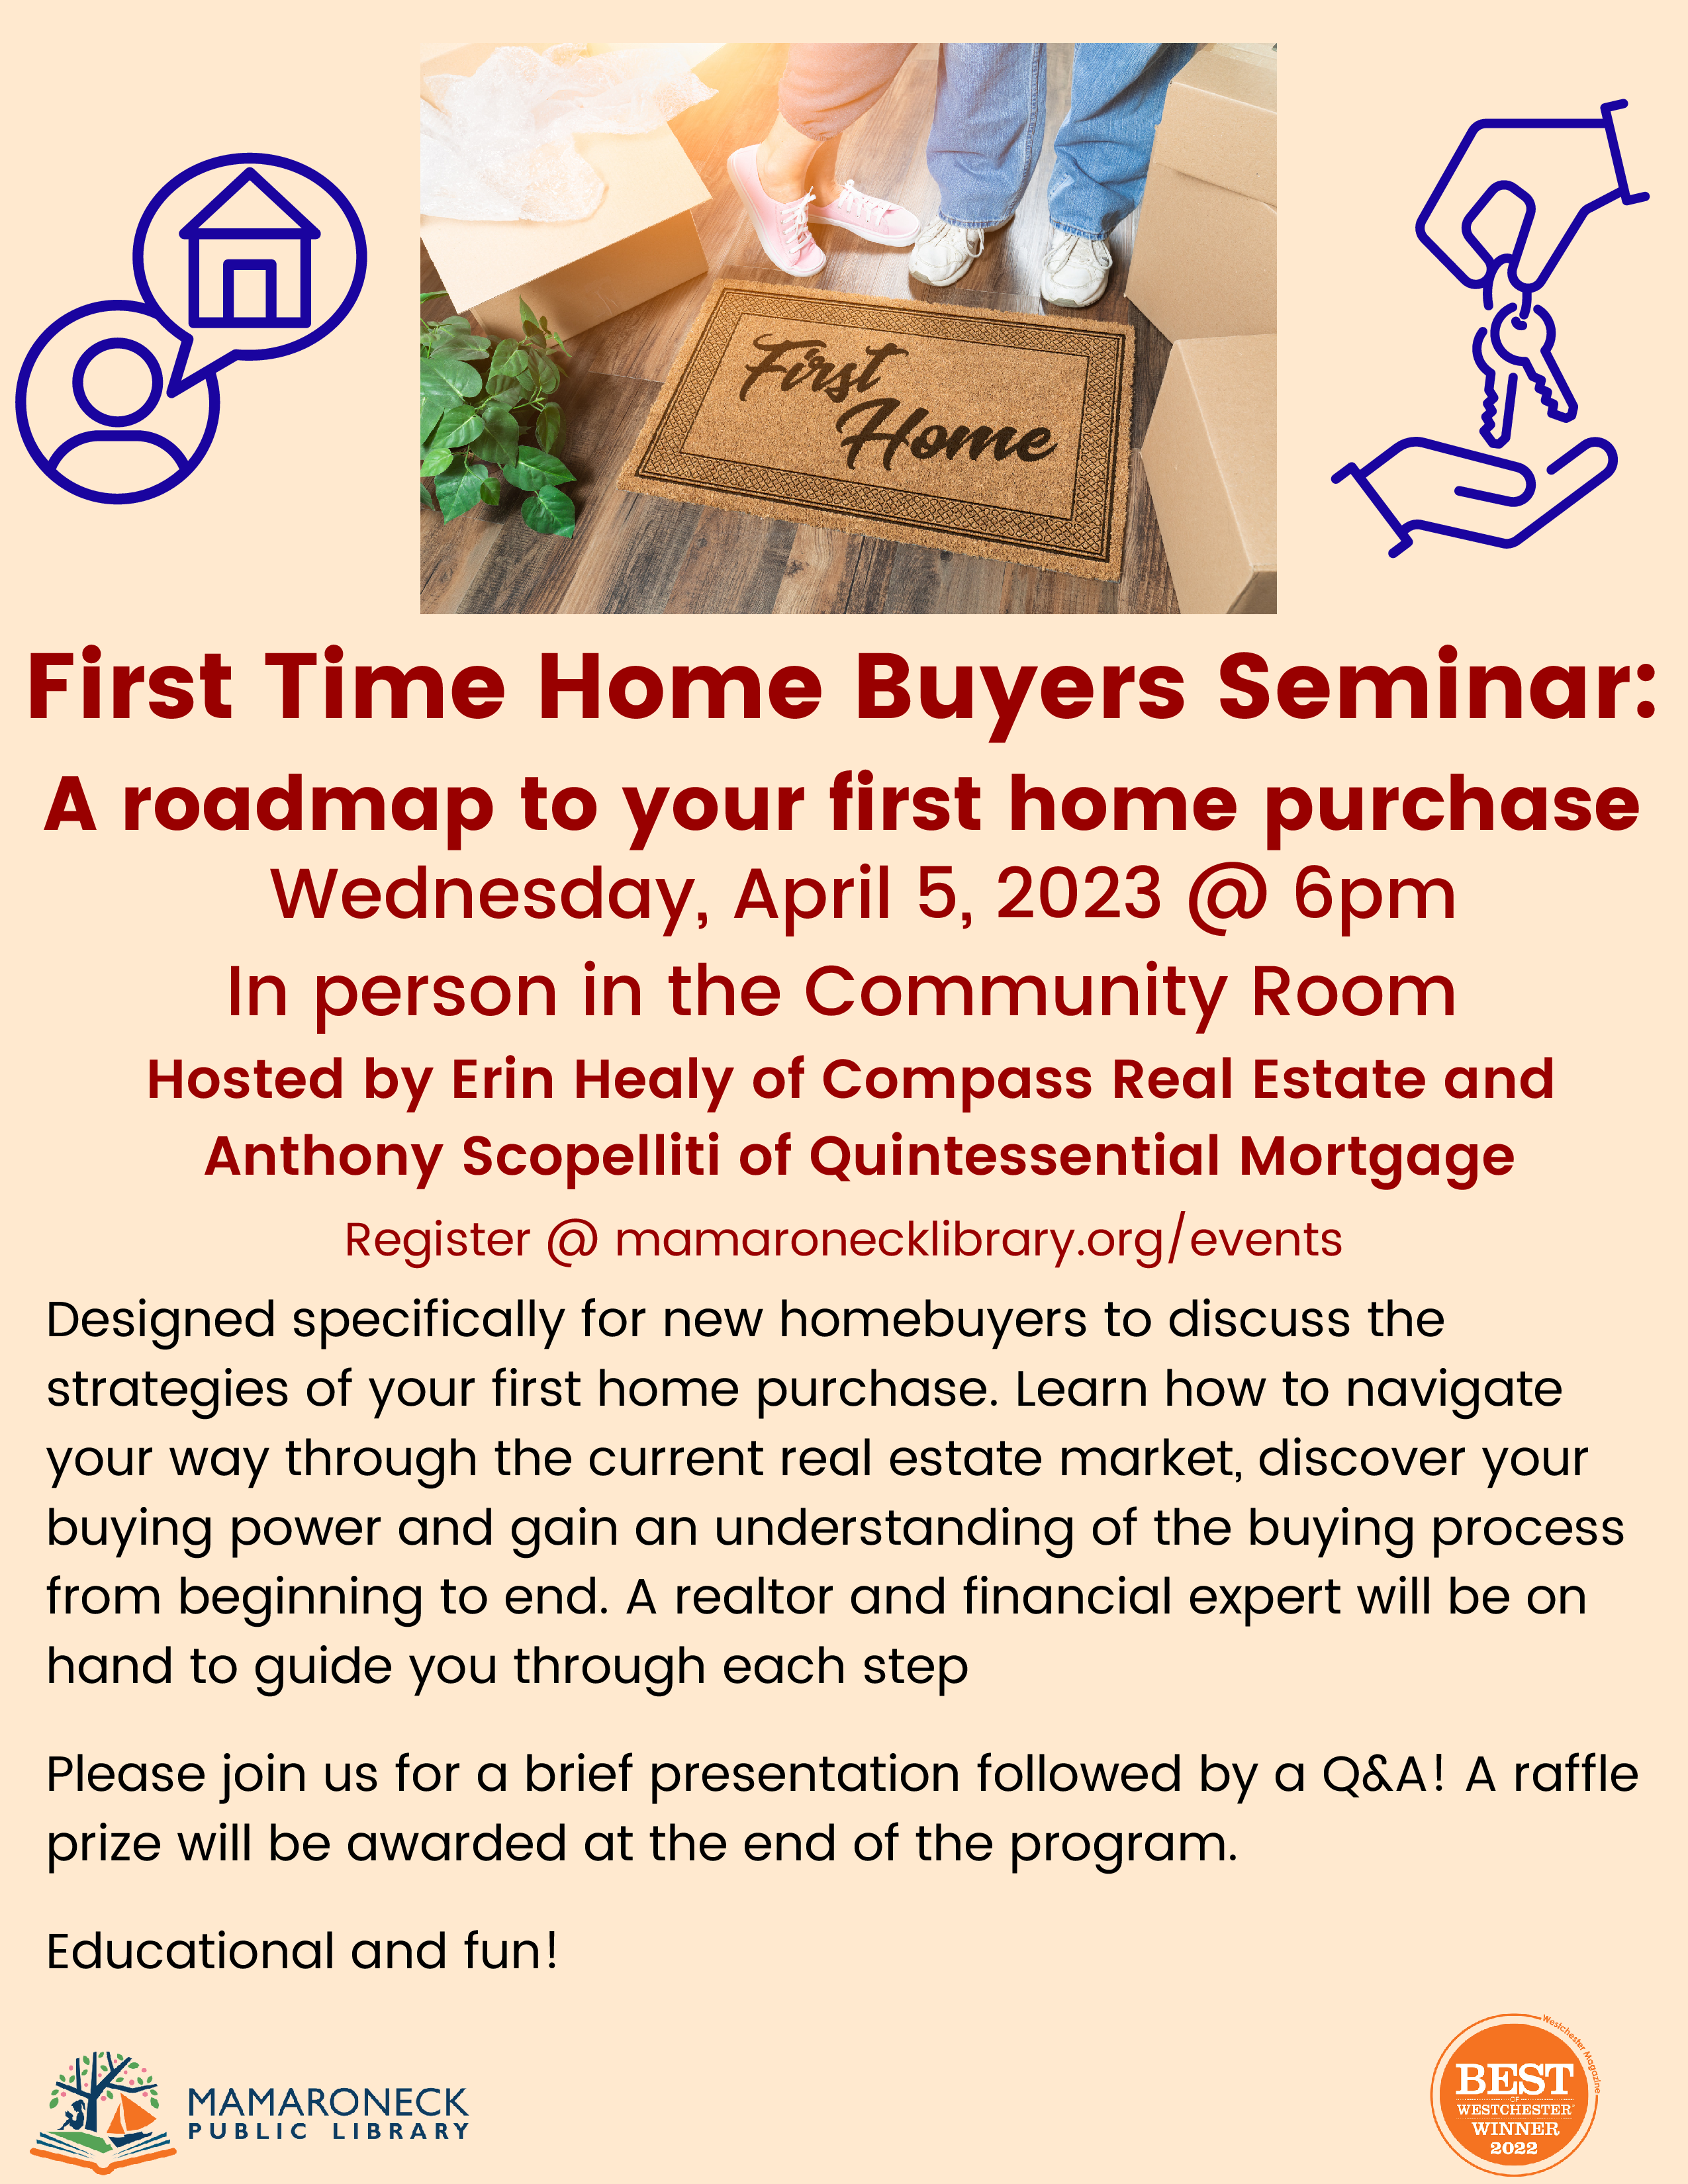 4/5 @ 6pm in the community room: First Time Home Buyers Seminar